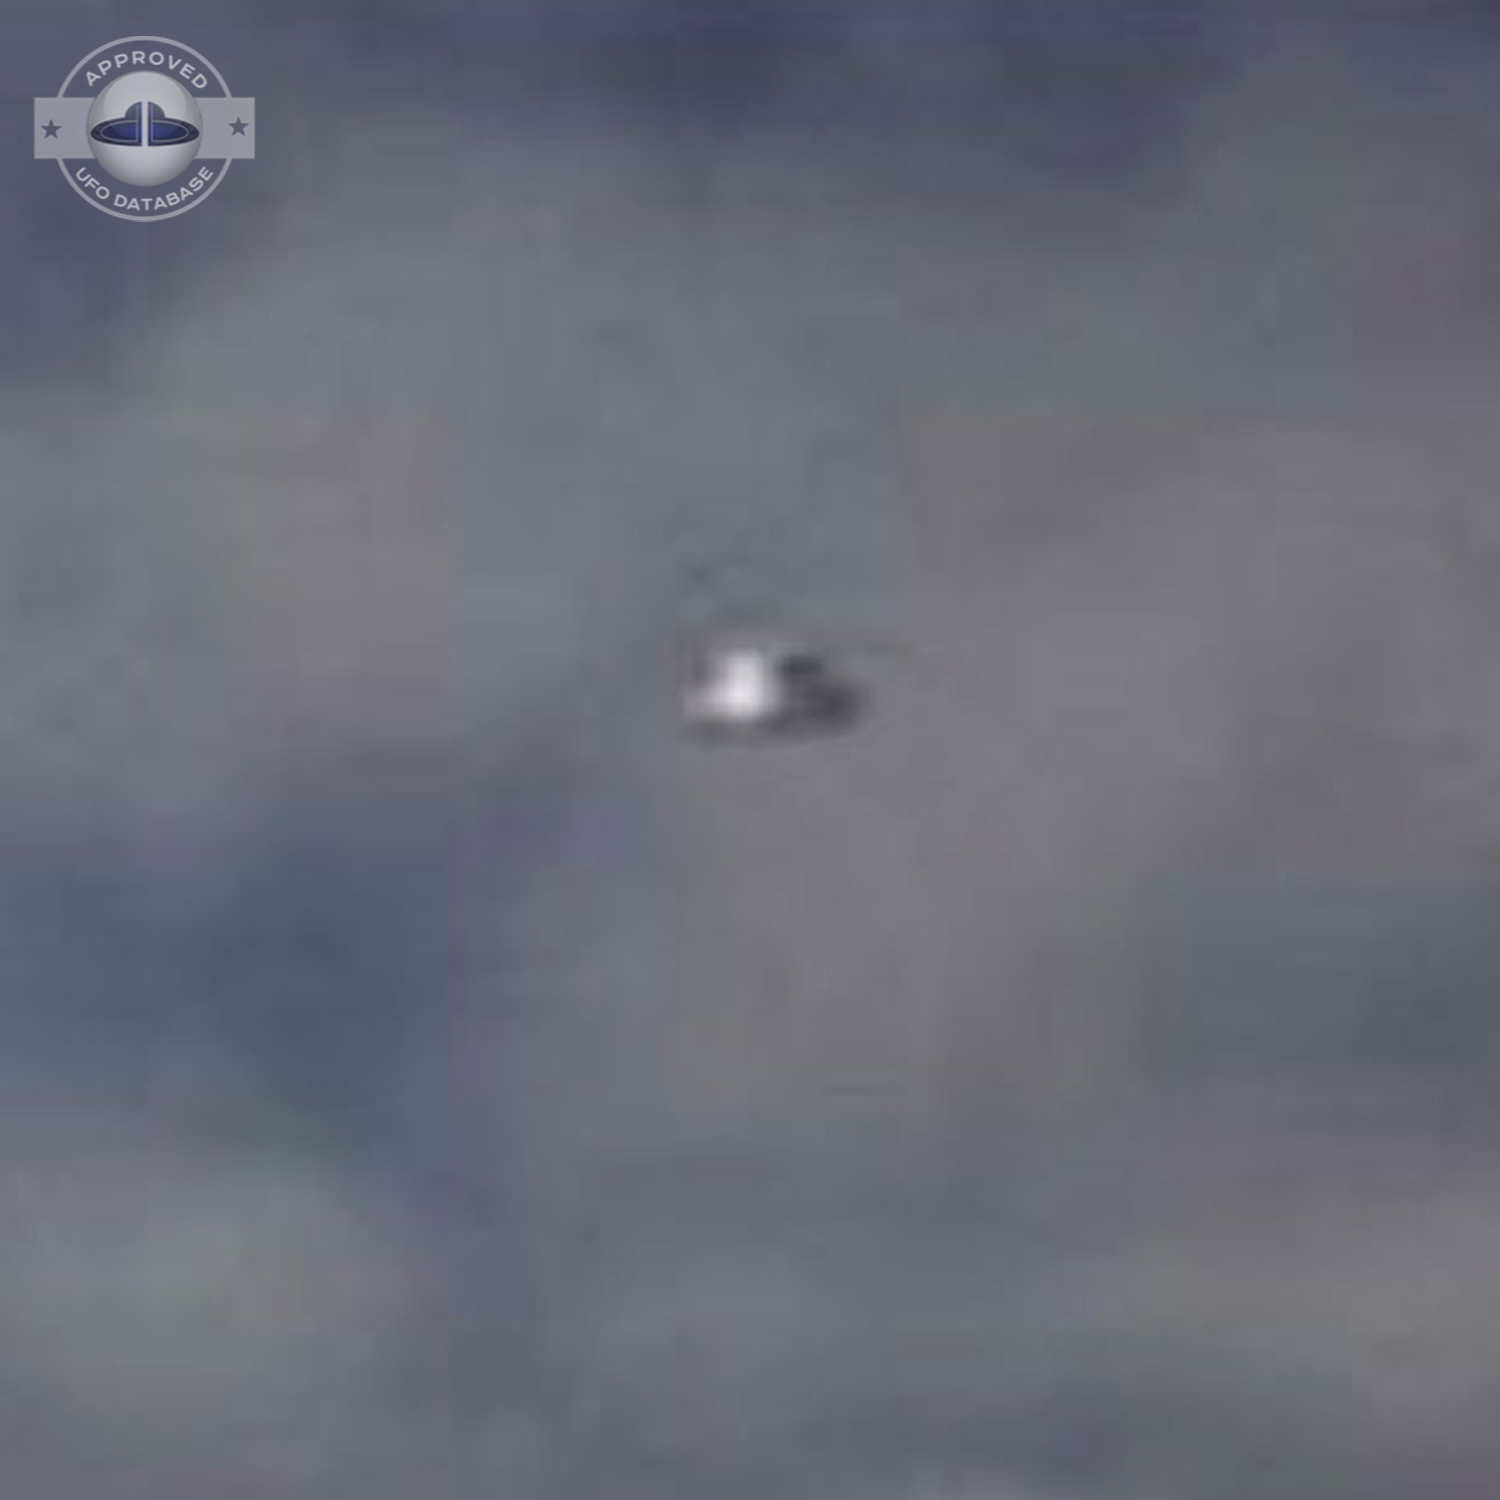 UFO over the country in Scotland during the day in a blue sky UFO Picture #15-3